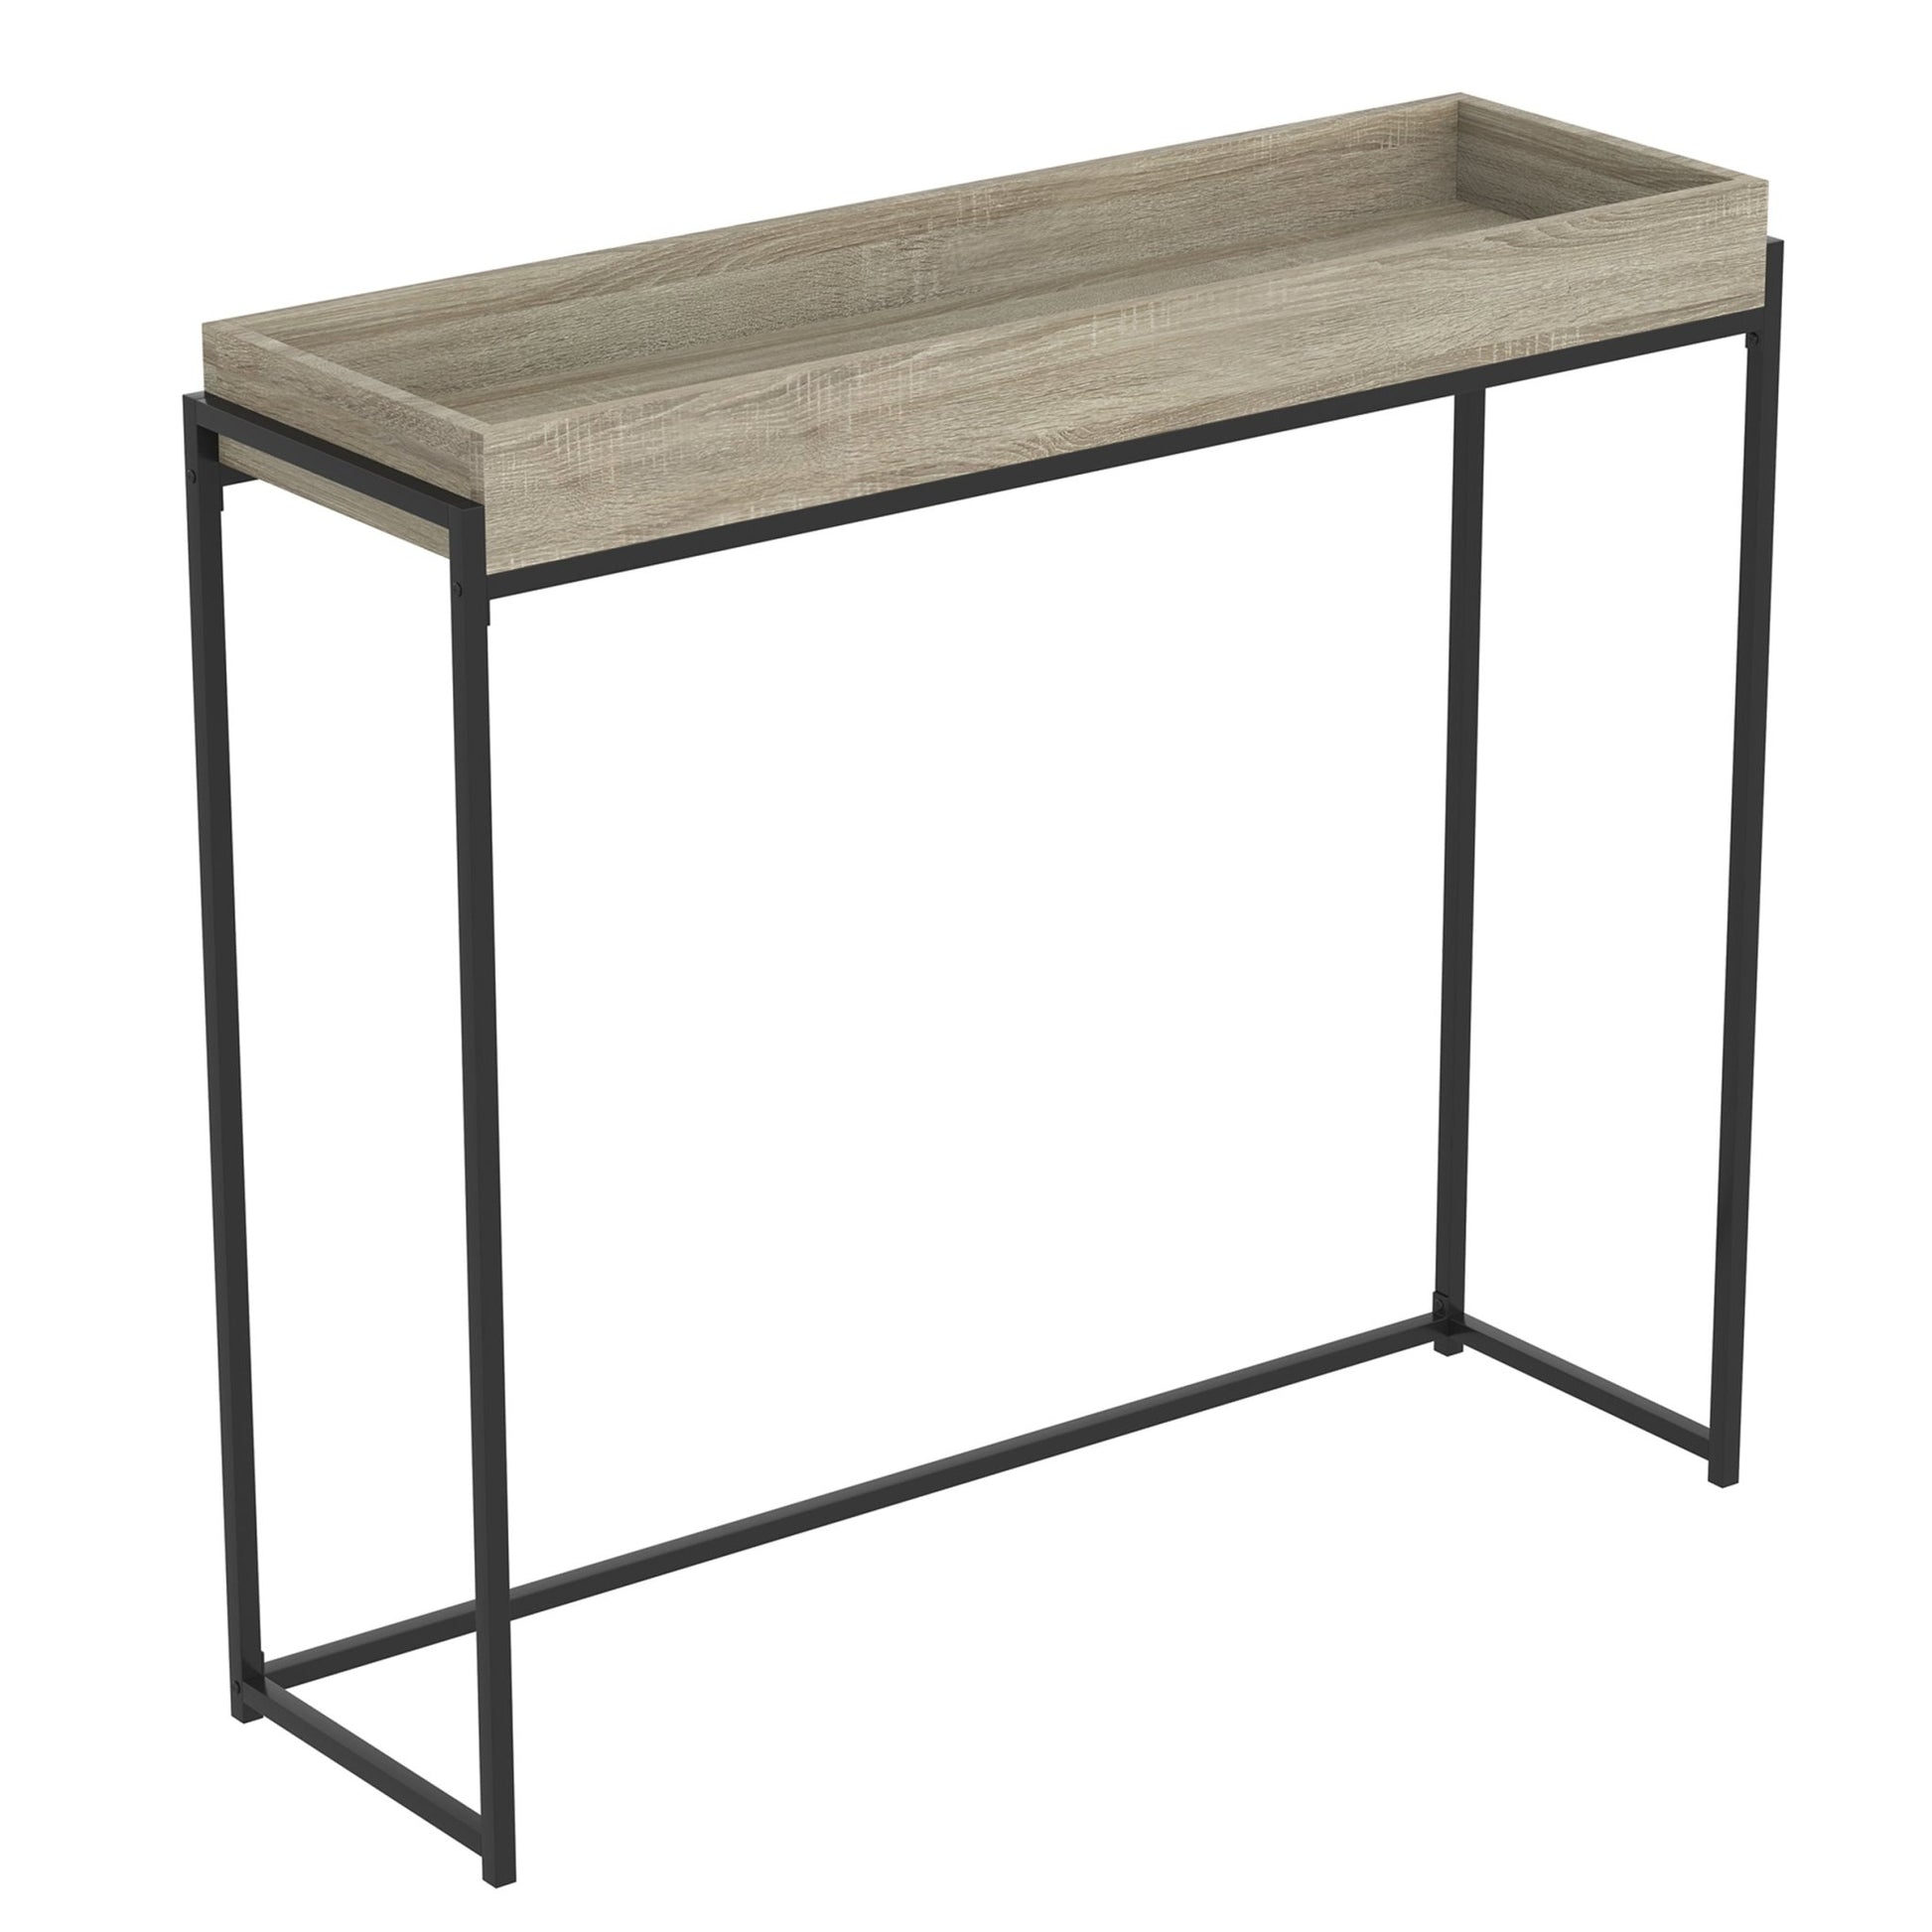 Console Sofa Table Dark Taupe Tray Top - DecoElegance - Sofa Console Table